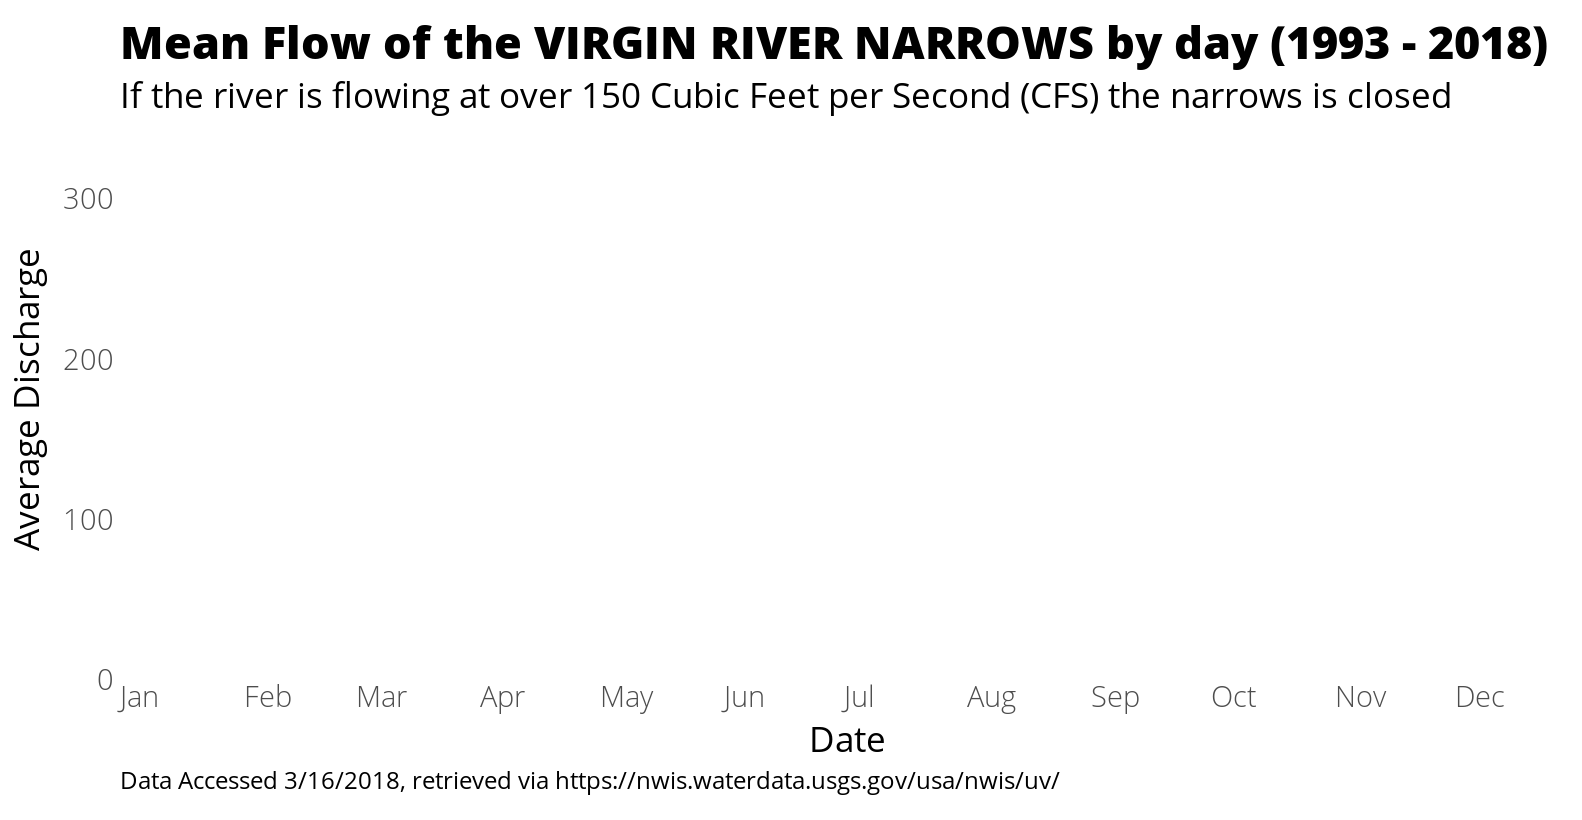 Mean Flow of the VIRGIN RIVER NARROWS by day (1993 - 2018)